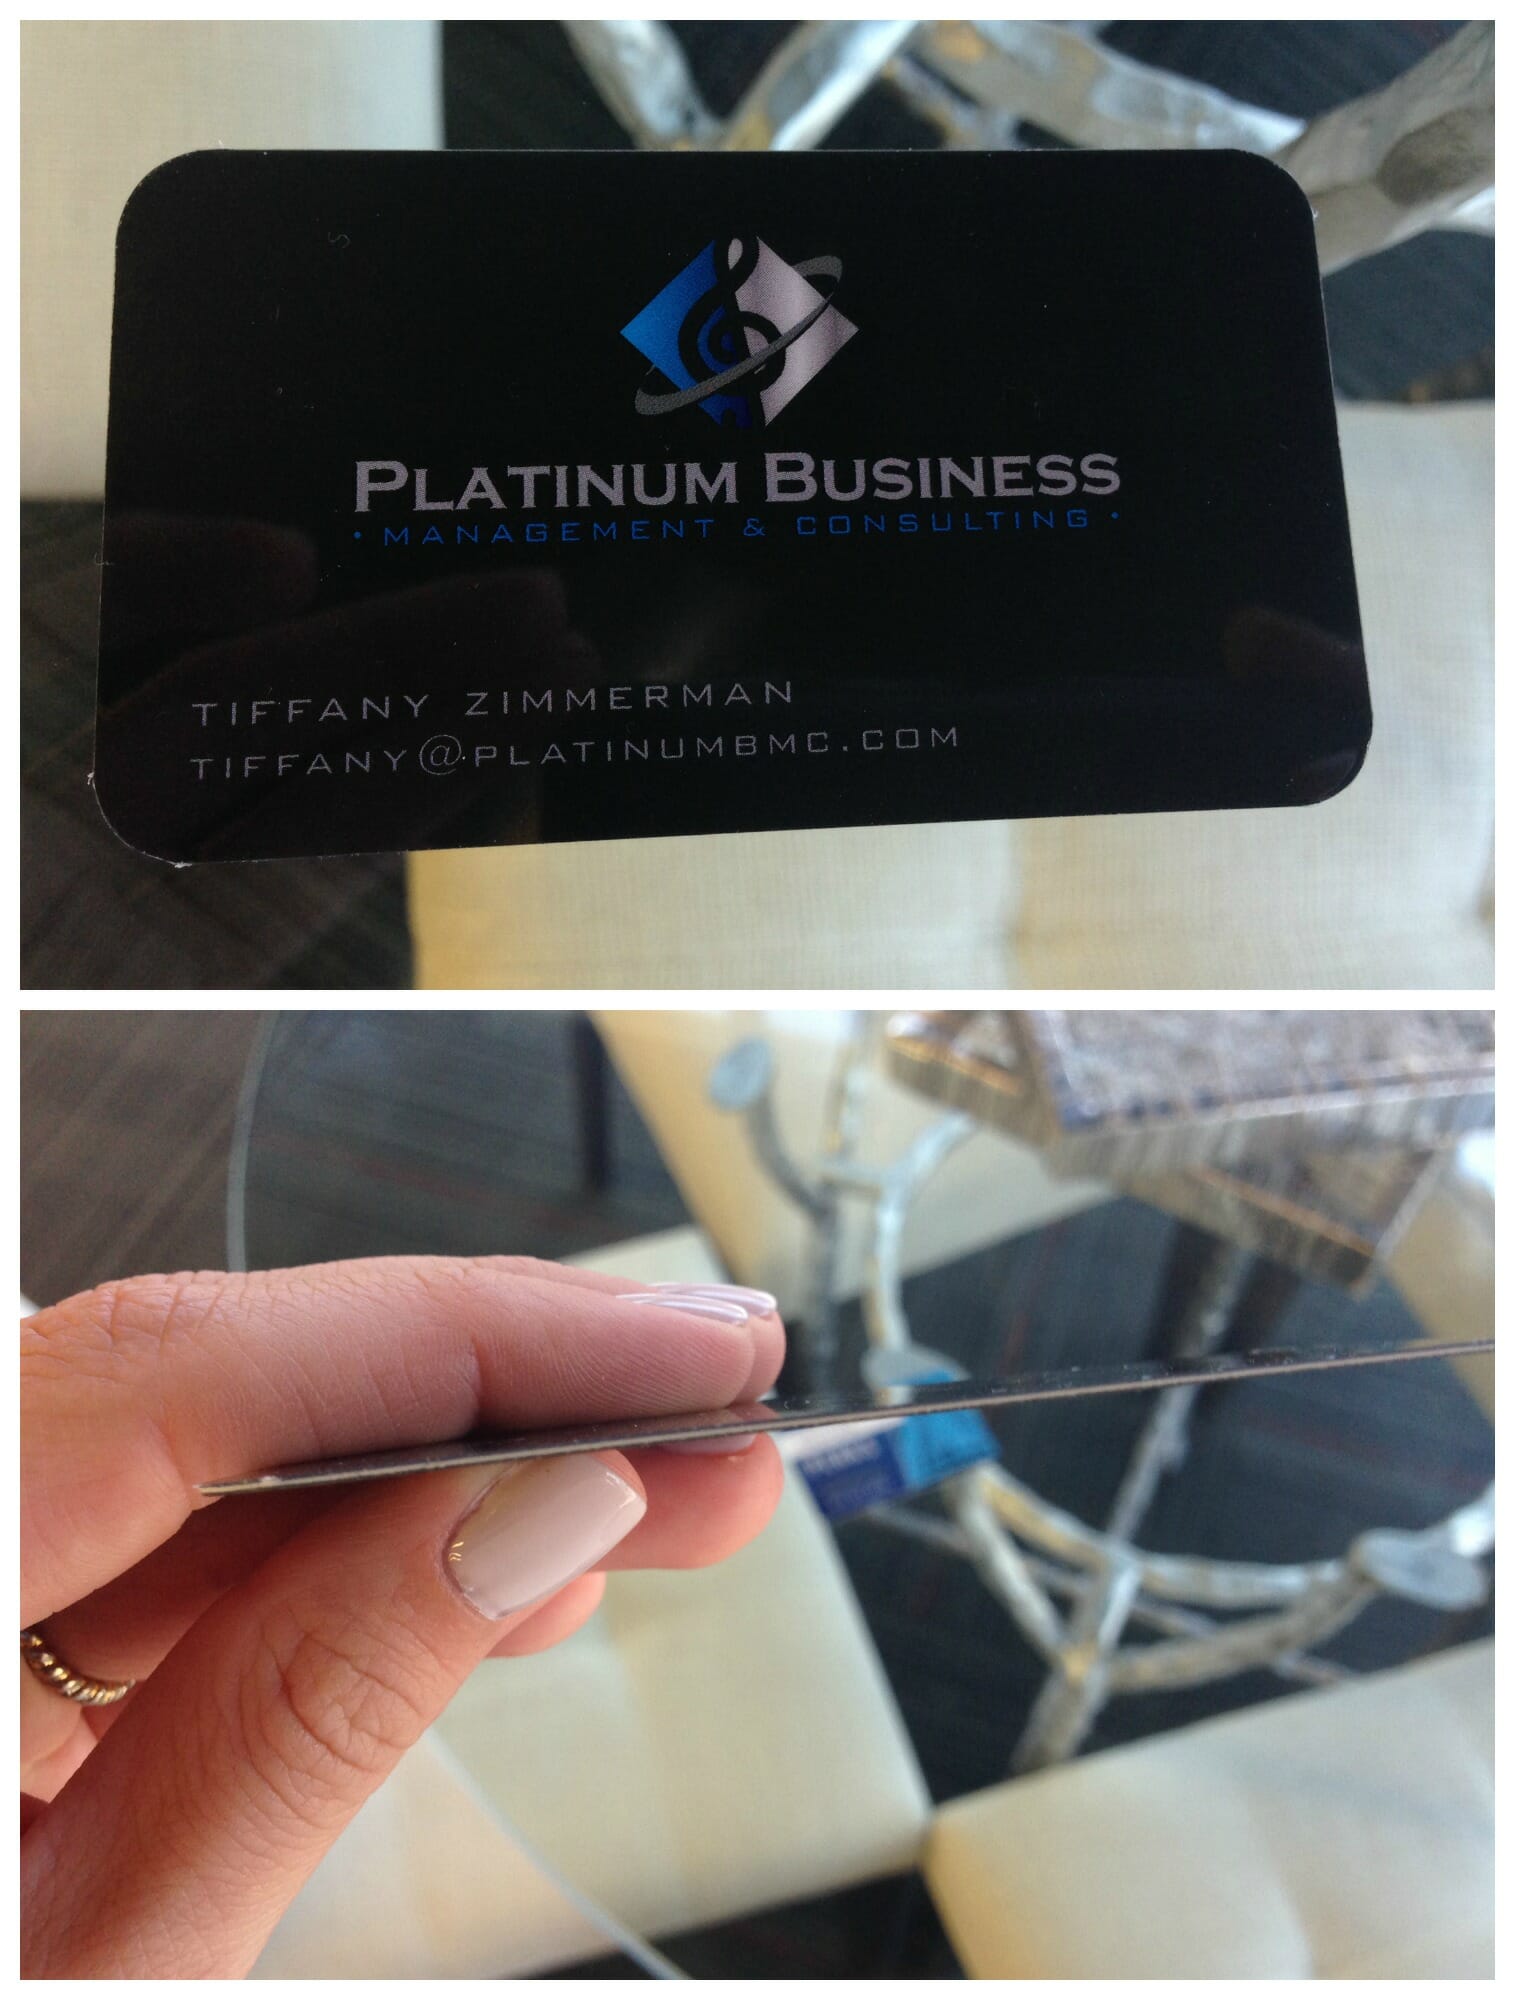 Gloss laminate business cards